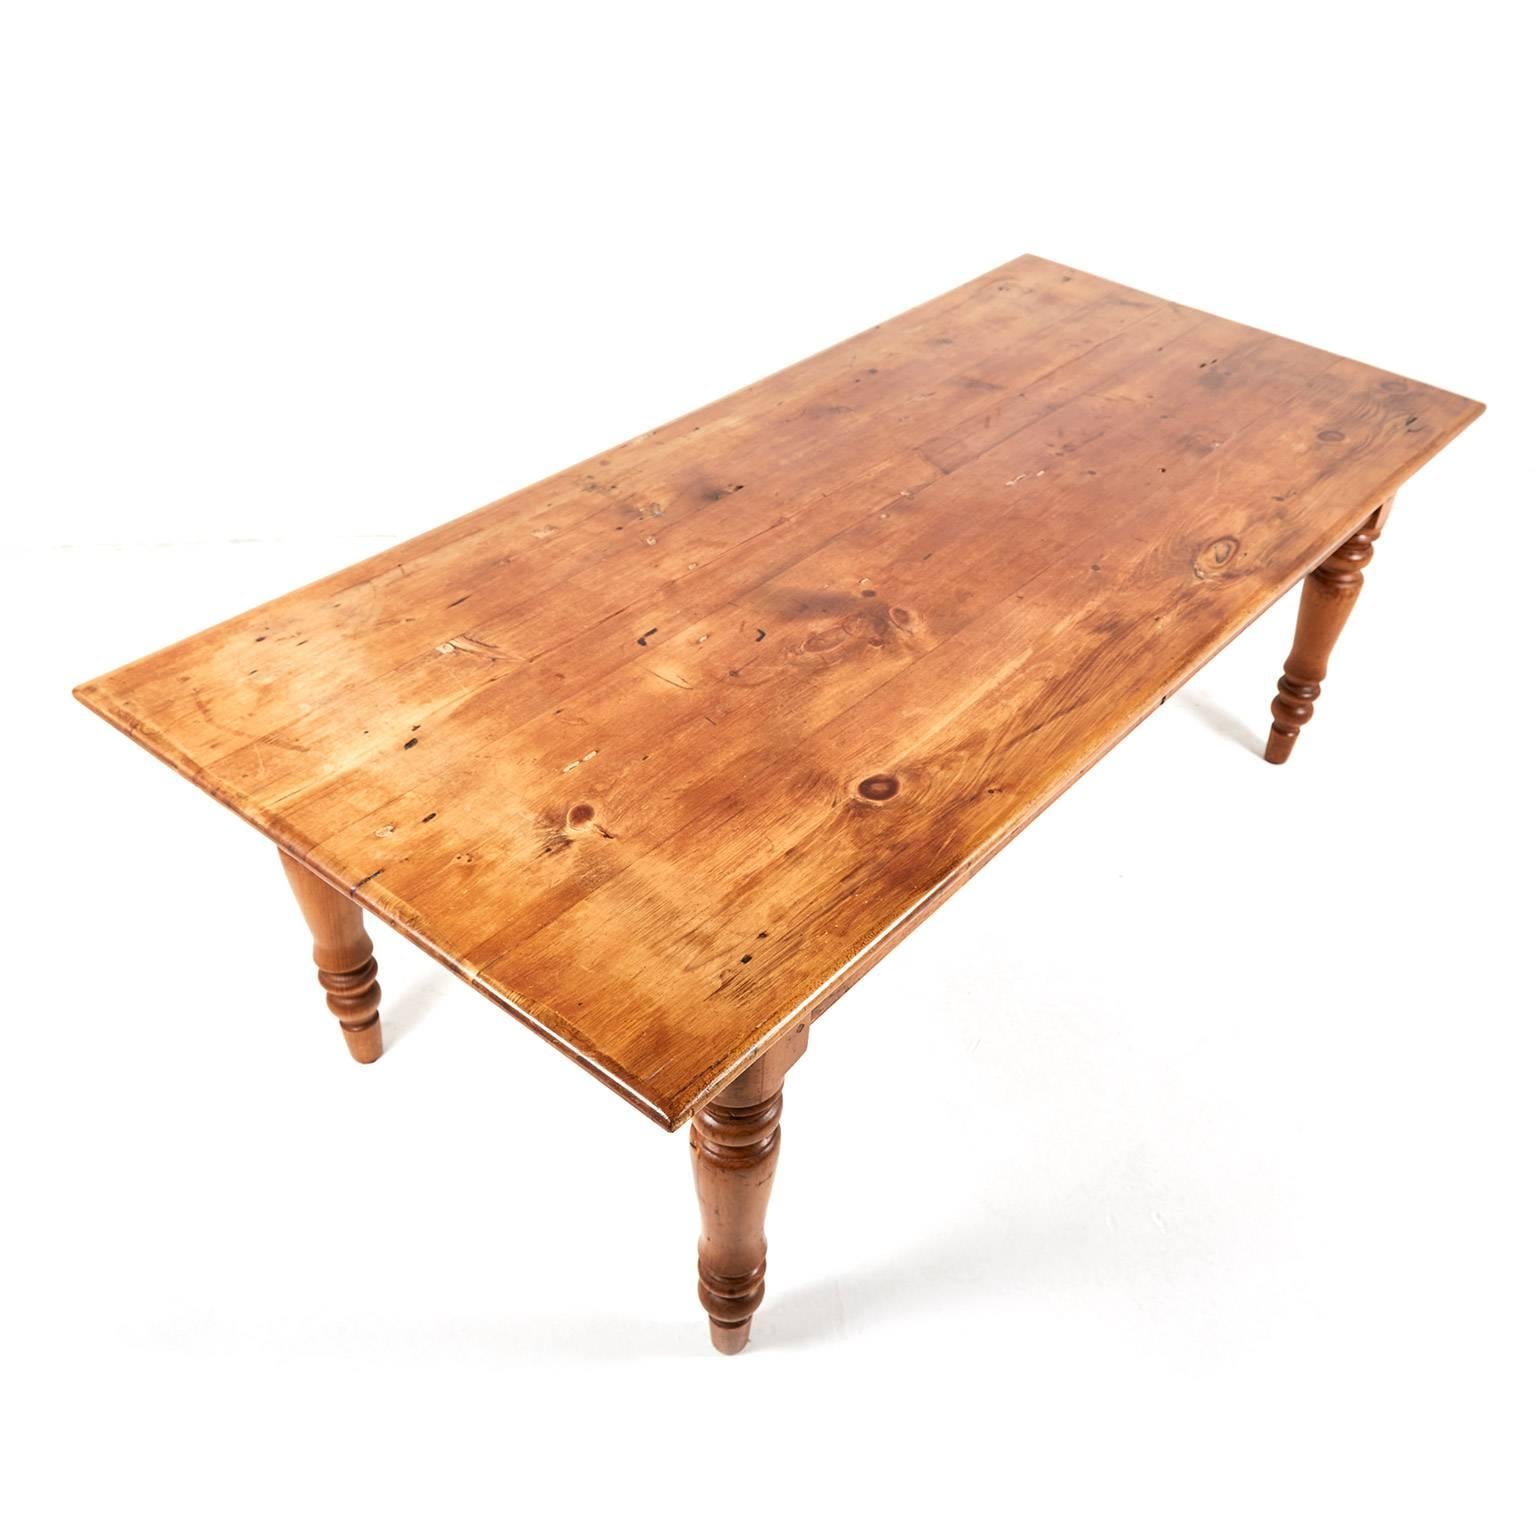 Antique 19th century pine Harvest table. A nice big and sturdy farm table with beautiful color, turned tapering legs, and pegged mortise and tenon joinery. Seats eight comfortably.




 